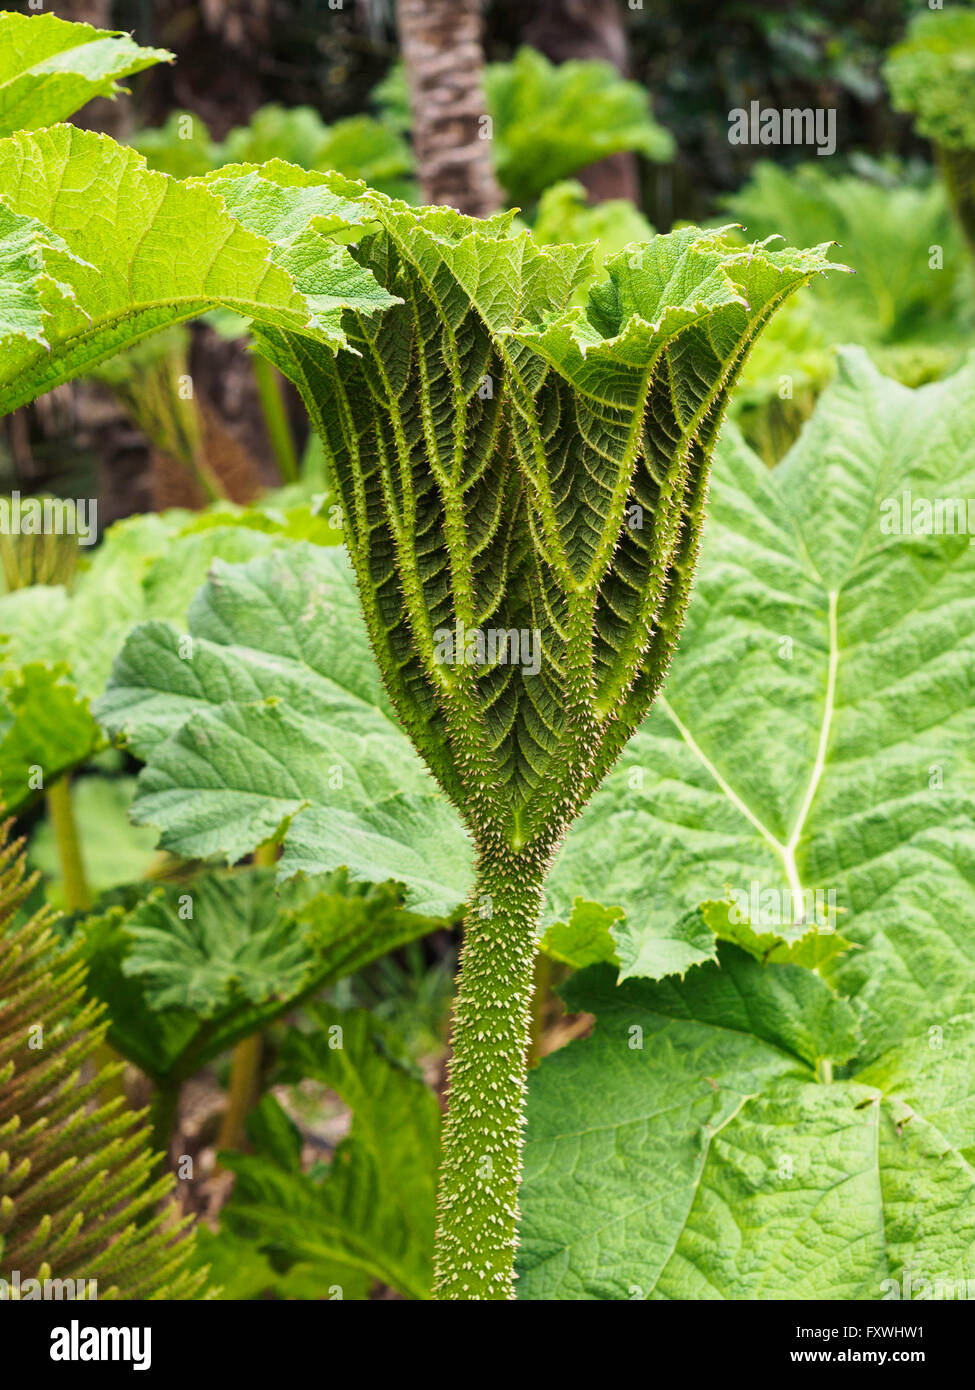 Picture Of Mature Rhubarb Plant 46